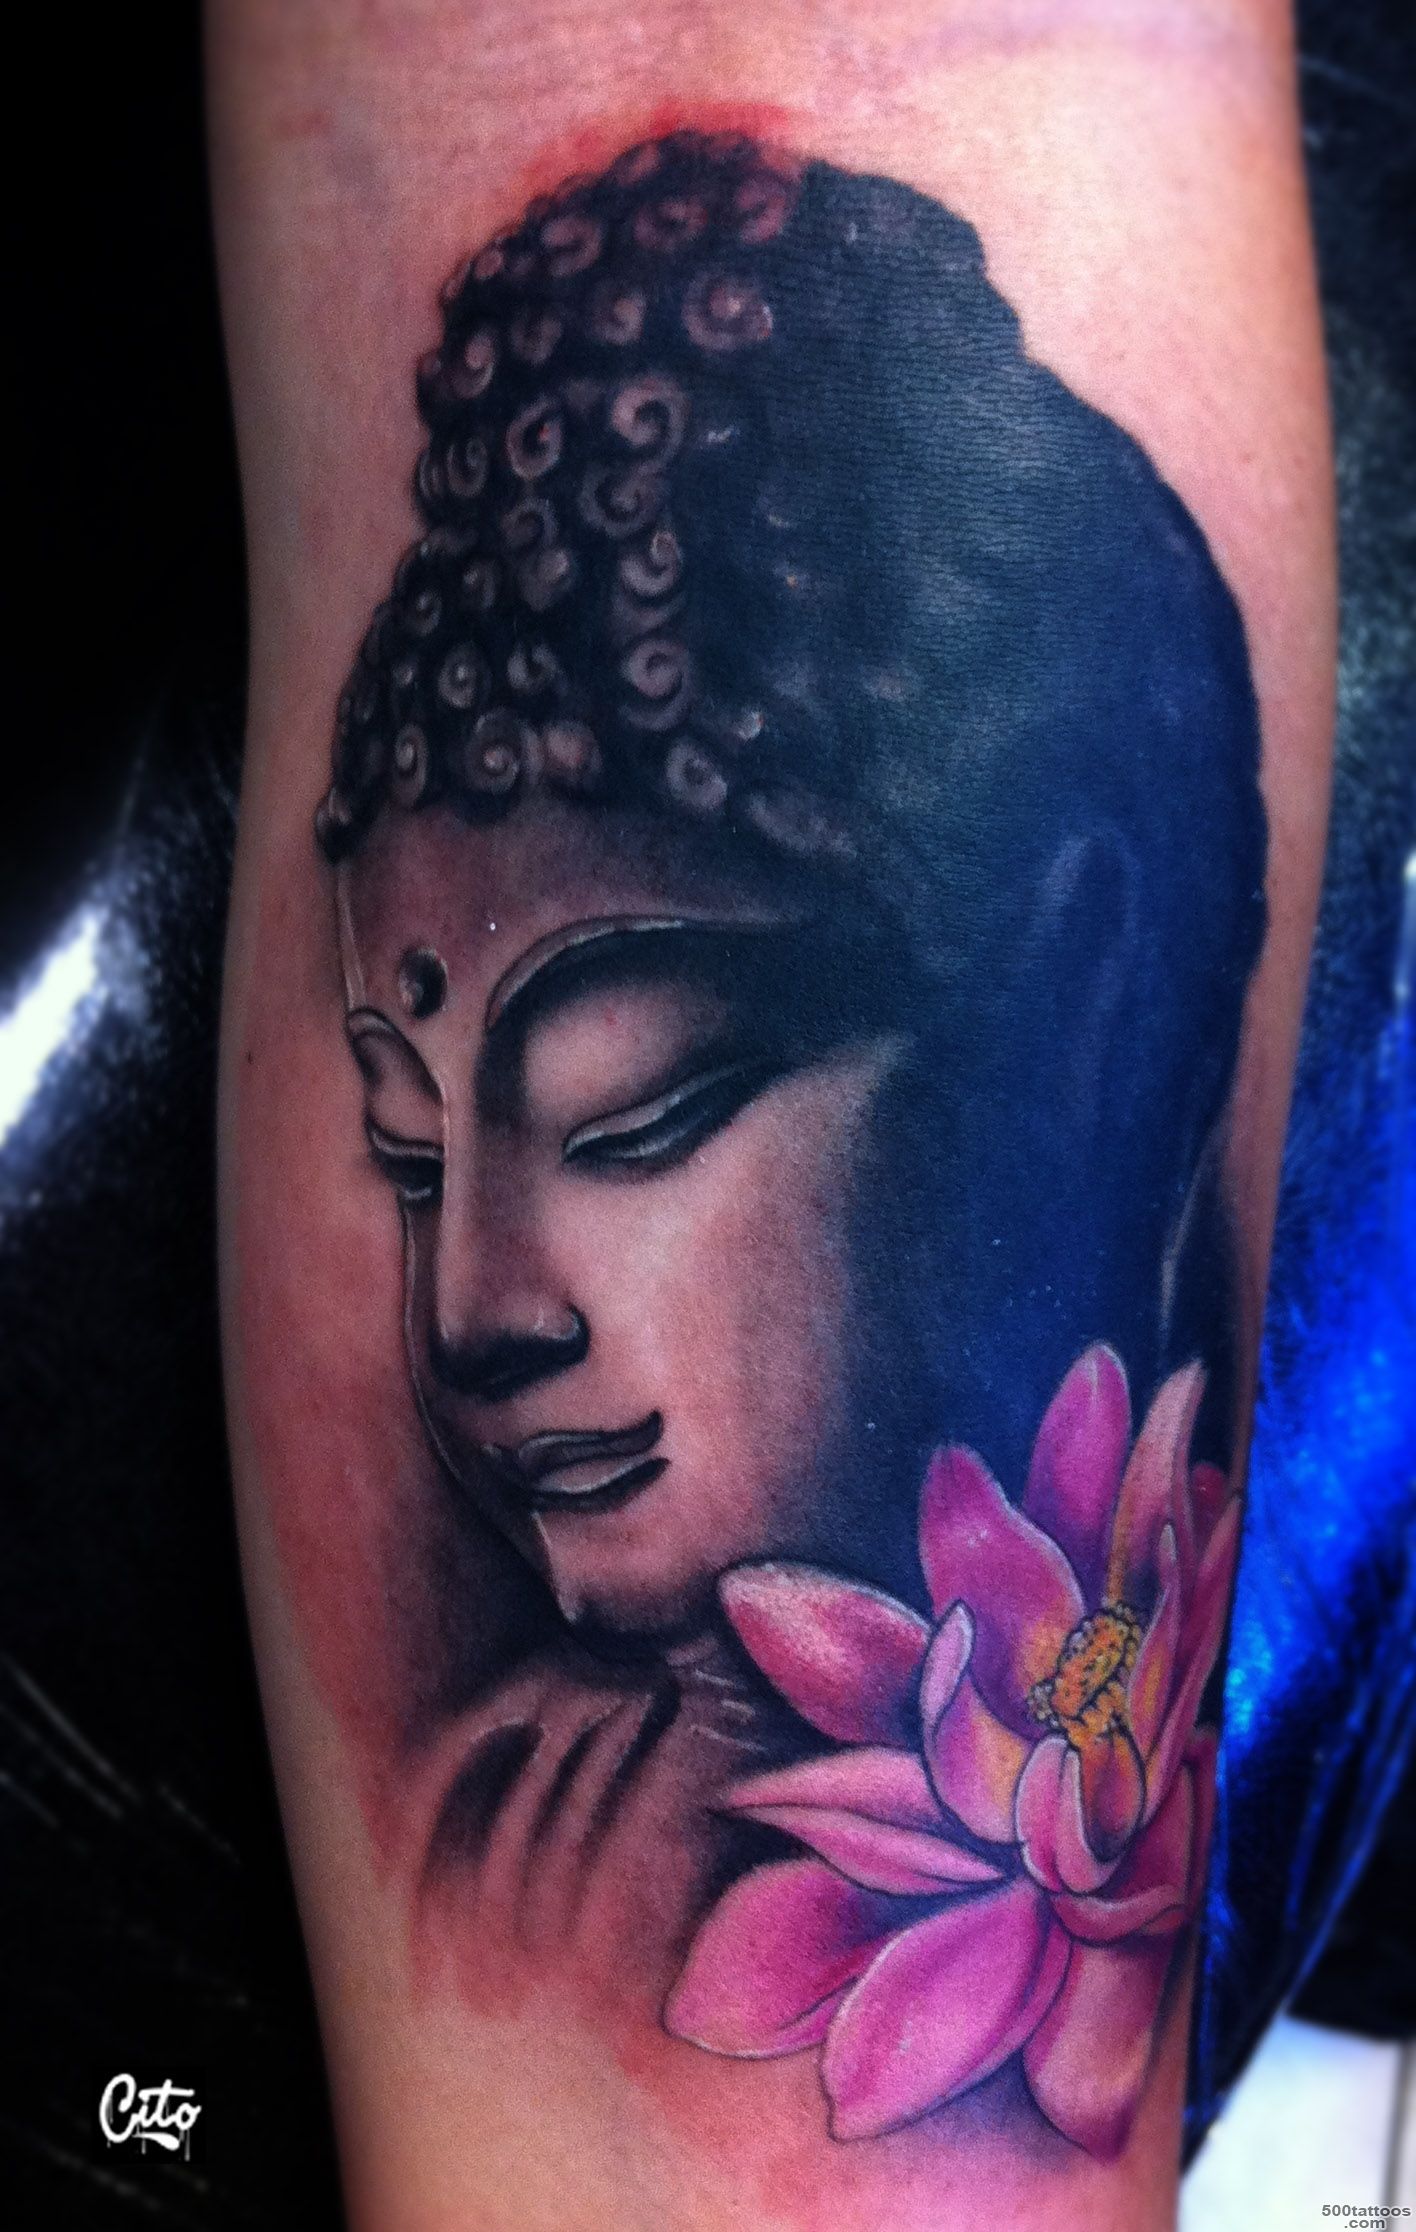 Buddhist Tattoos, Designs And Ideas  Page 6_25